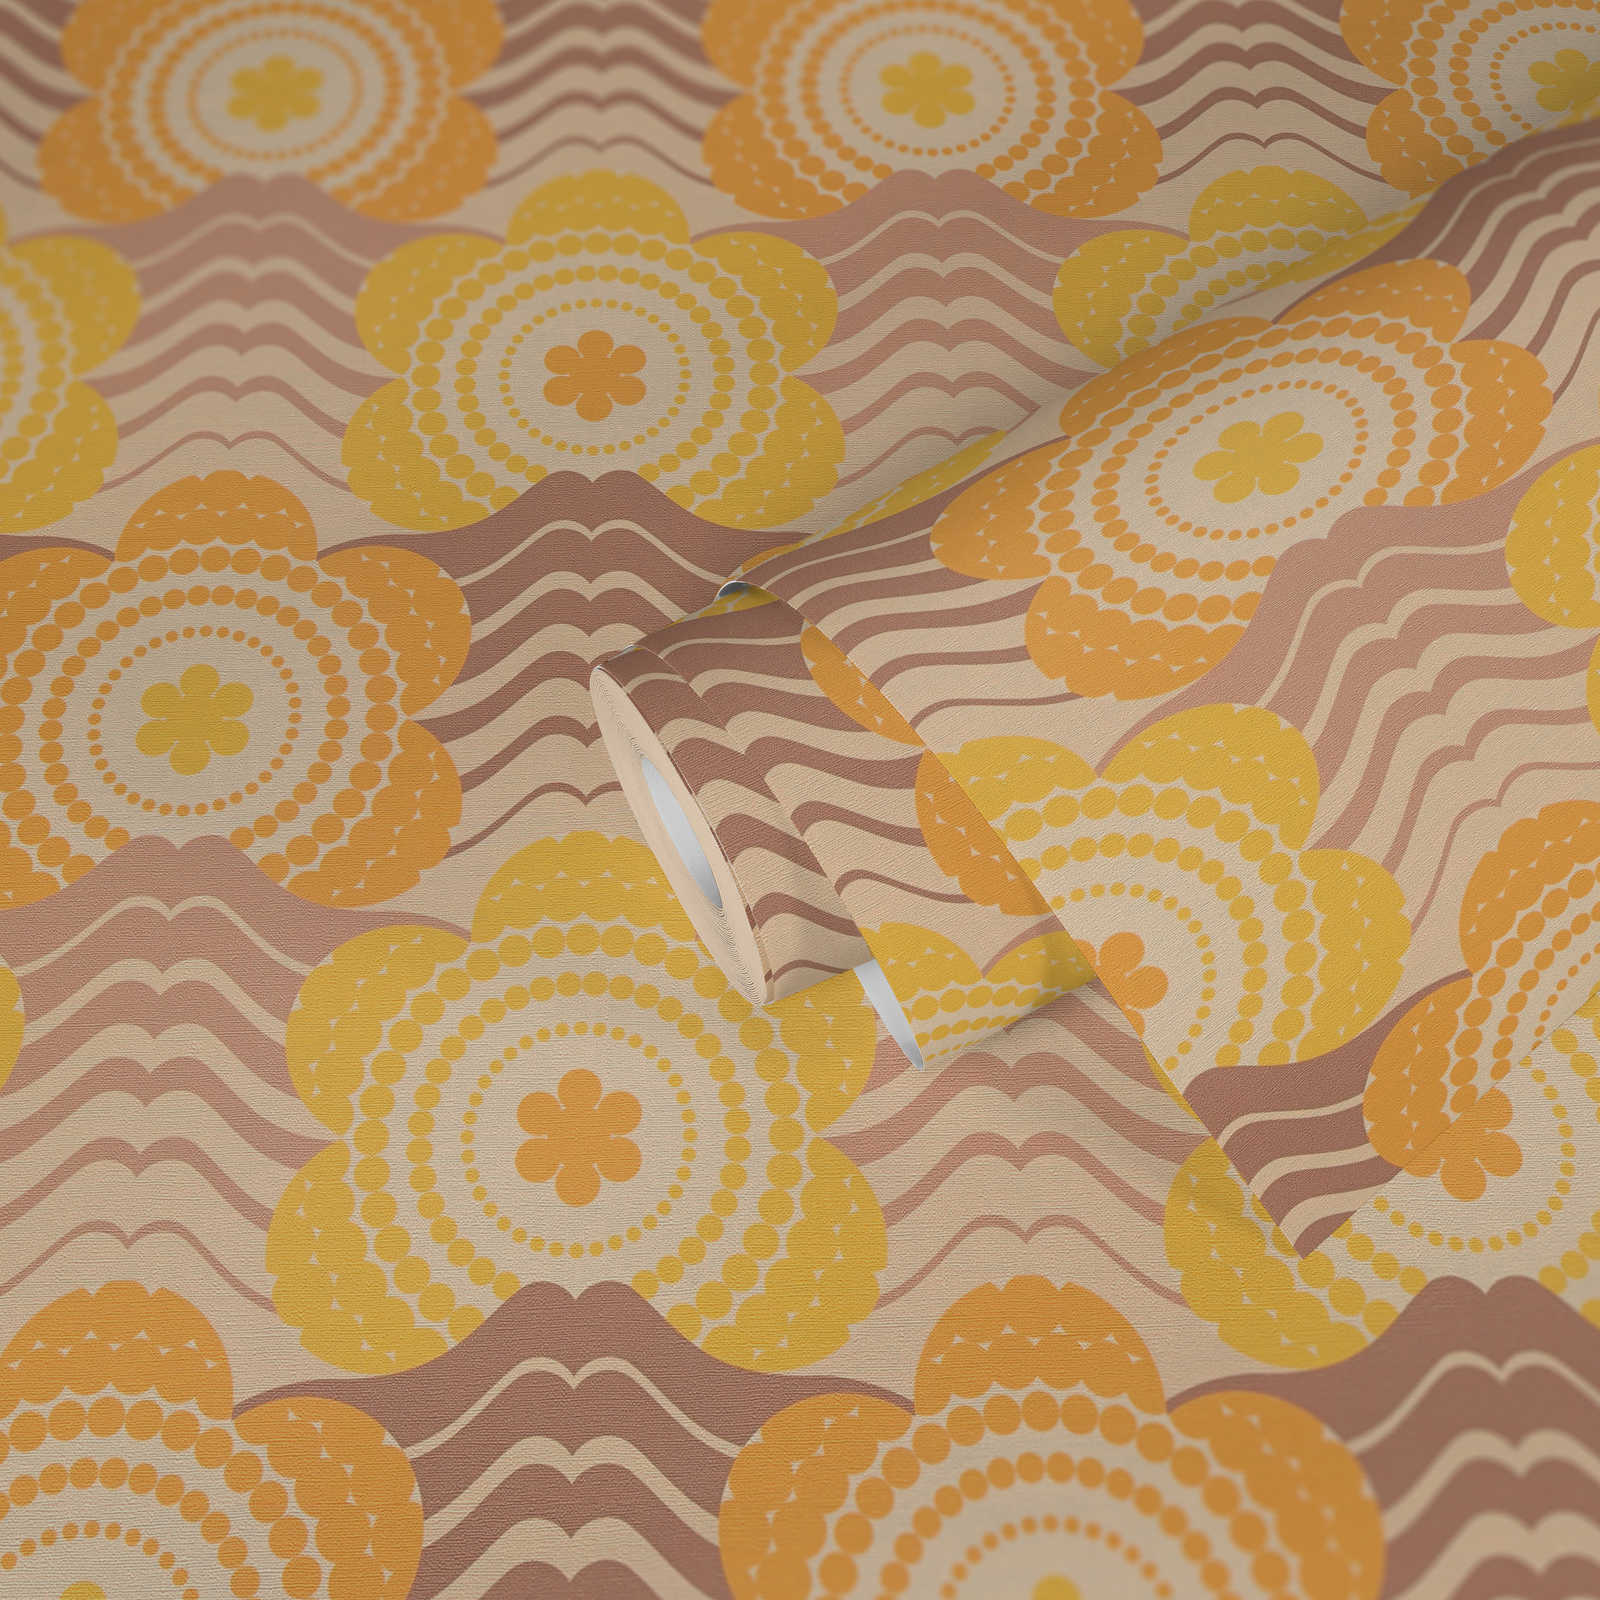             Non-woven wallpaper with floral pattern in 70s style - beige, brown, orange
        